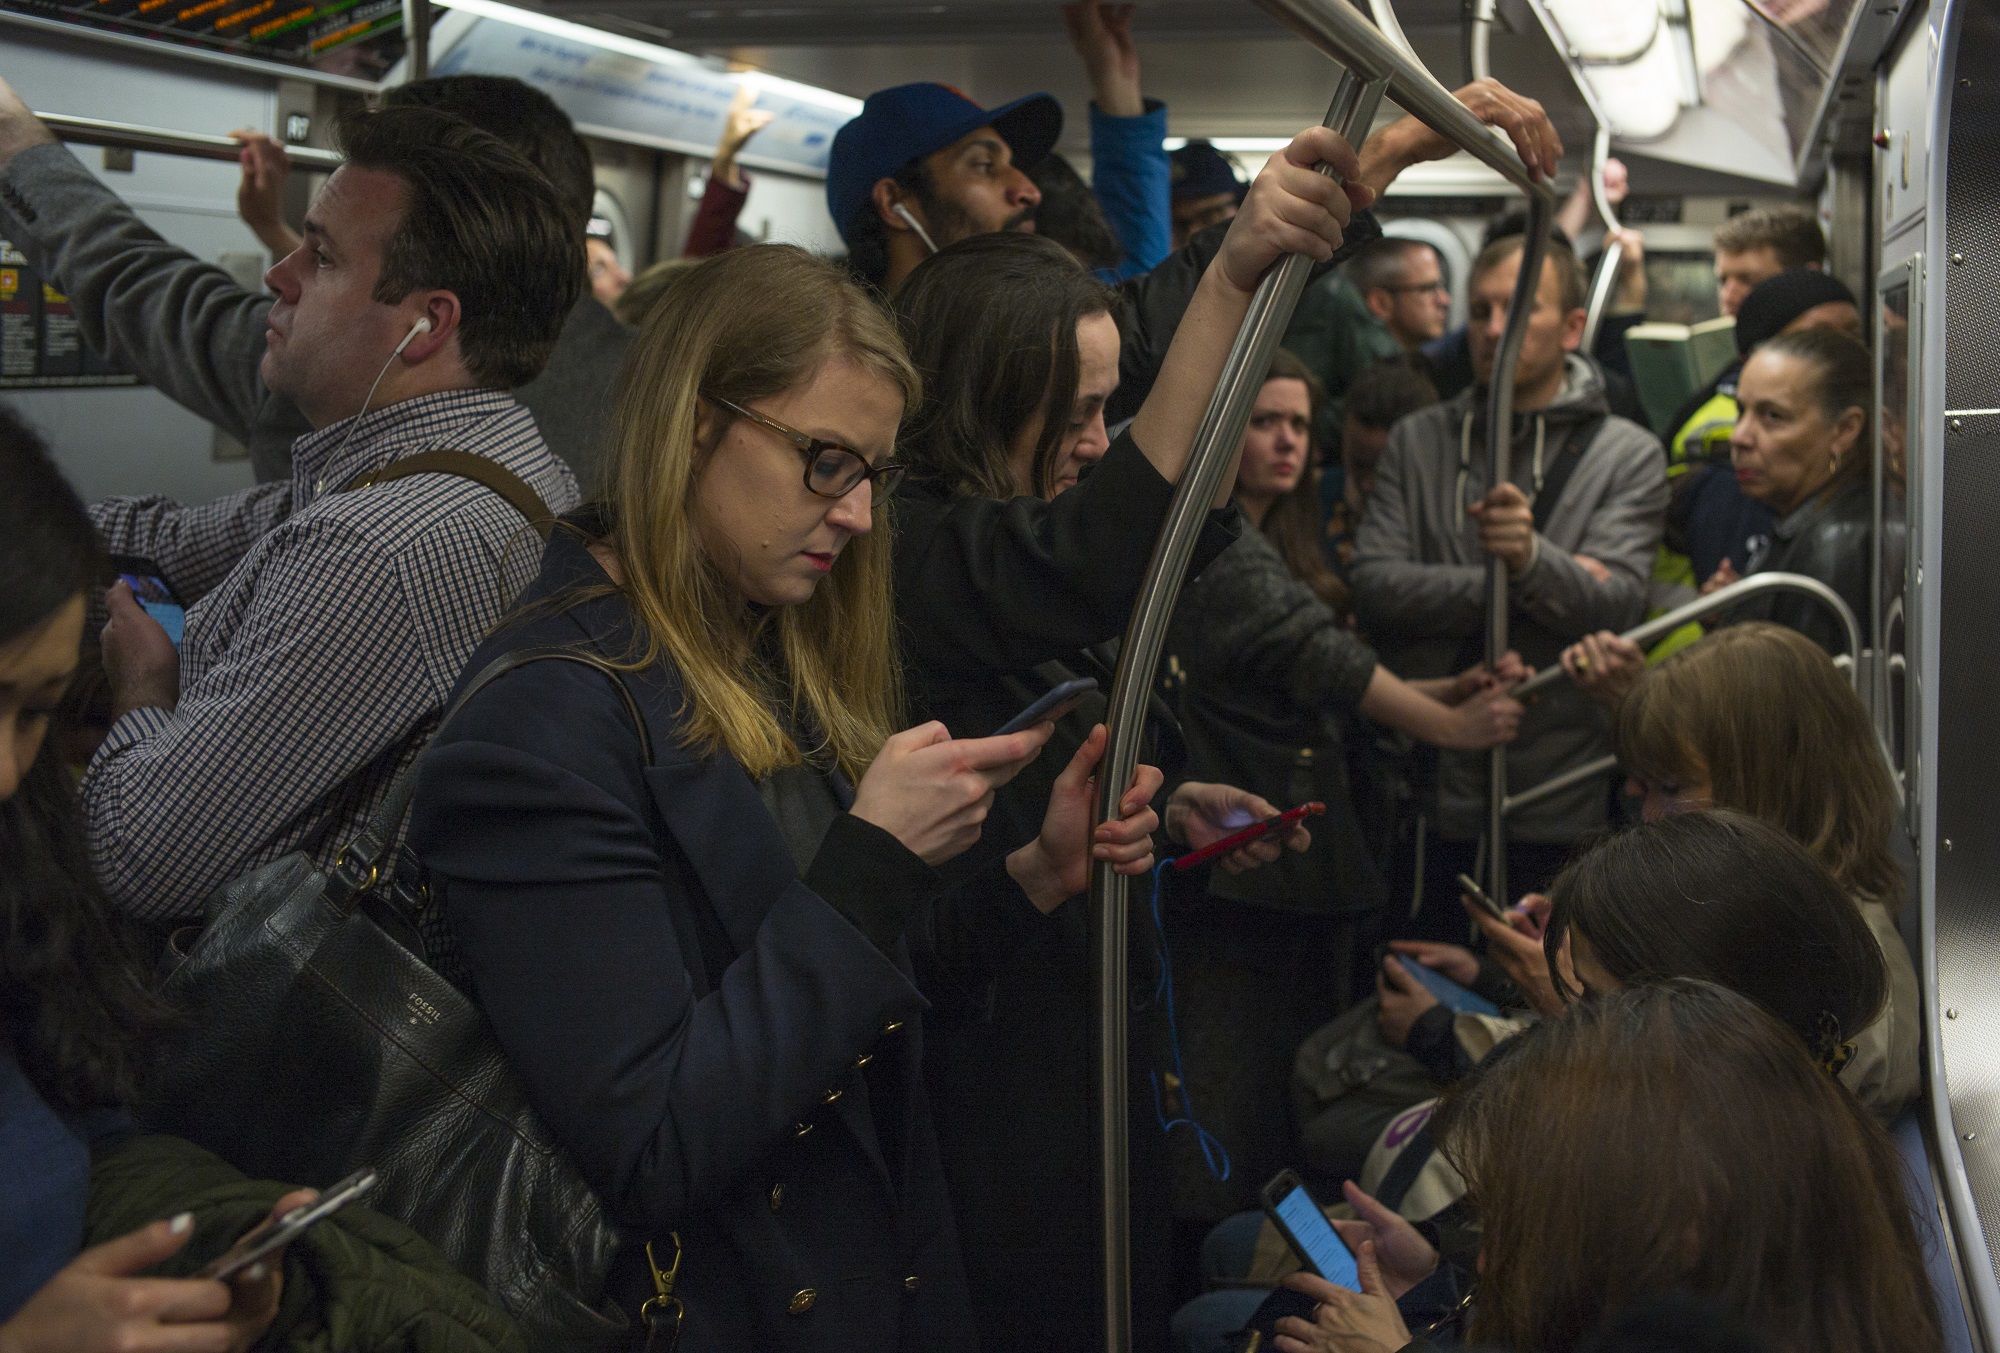 Google Maps shows how crowded your bus will probably be